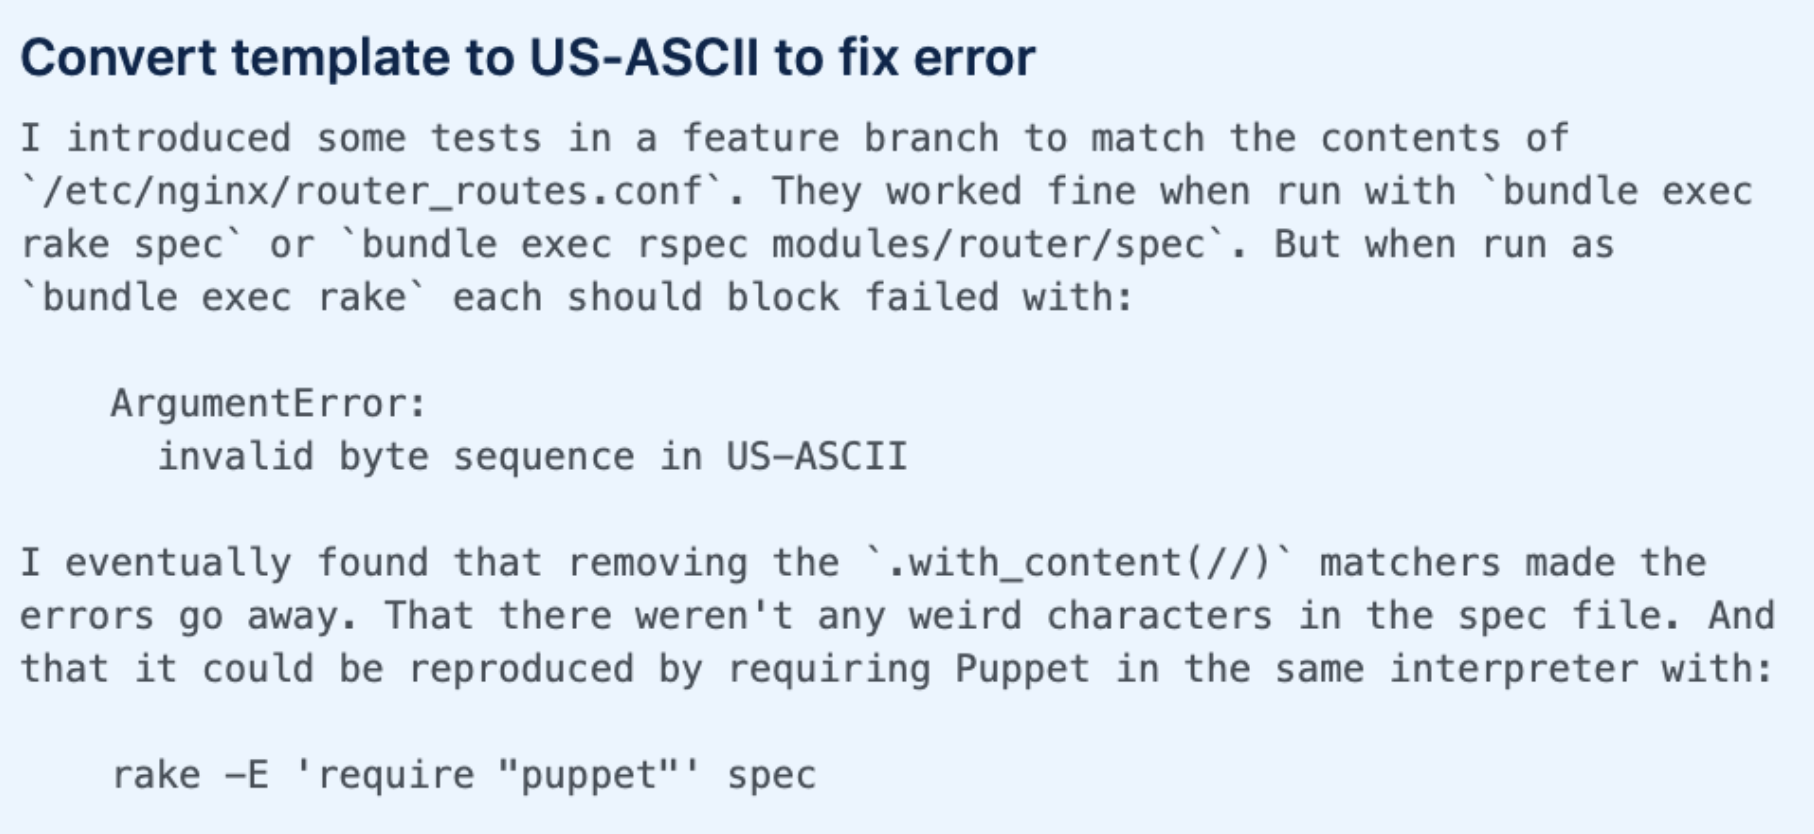 Convert template to US-ASCIl to fix error. I introduced some tests in a feature branch to match the contents of /etc/nginx/router_routes.conf. They worked fine when run with 'bundle exec rake spec' or 'bundle exec rspec modules/router/spec'. But when run as 'bundle exec rake' each should block failed with: ArgumentError: invalid byte sequence in US-ASCII I eventually found that removing the ' with_content(//)' matchers made the errors go away. That there weren't any weird characters in the spec file. And that it could be reproduced by requiring Puppet in the same interpreter with: rake -E 'require "puppet"' spec.